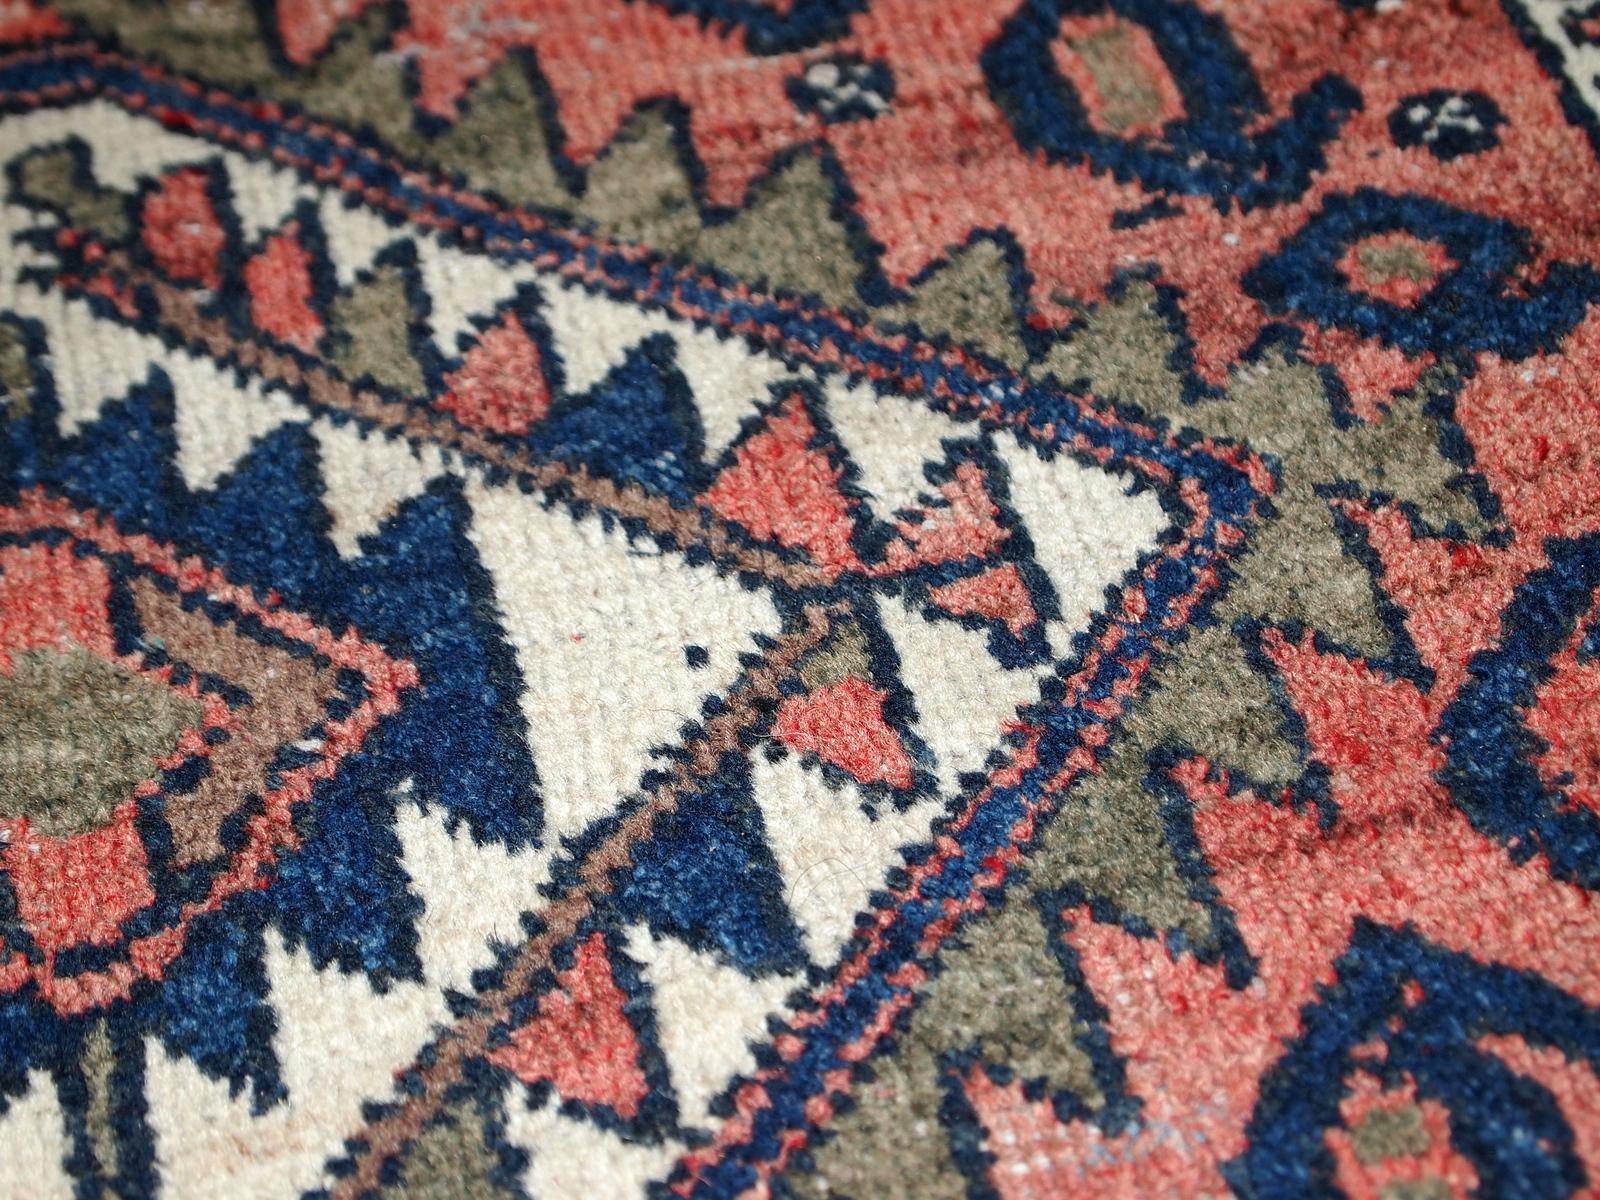 Handmade vintage Kurdish bagface in original condition, it has some signs of age. The rug is from the beginning of 20th century.

?-Condition: original, some low pile, 

-circa 1930s,

-Size: 1.8' x 1.9' (55cm x 59cm),

-Material: